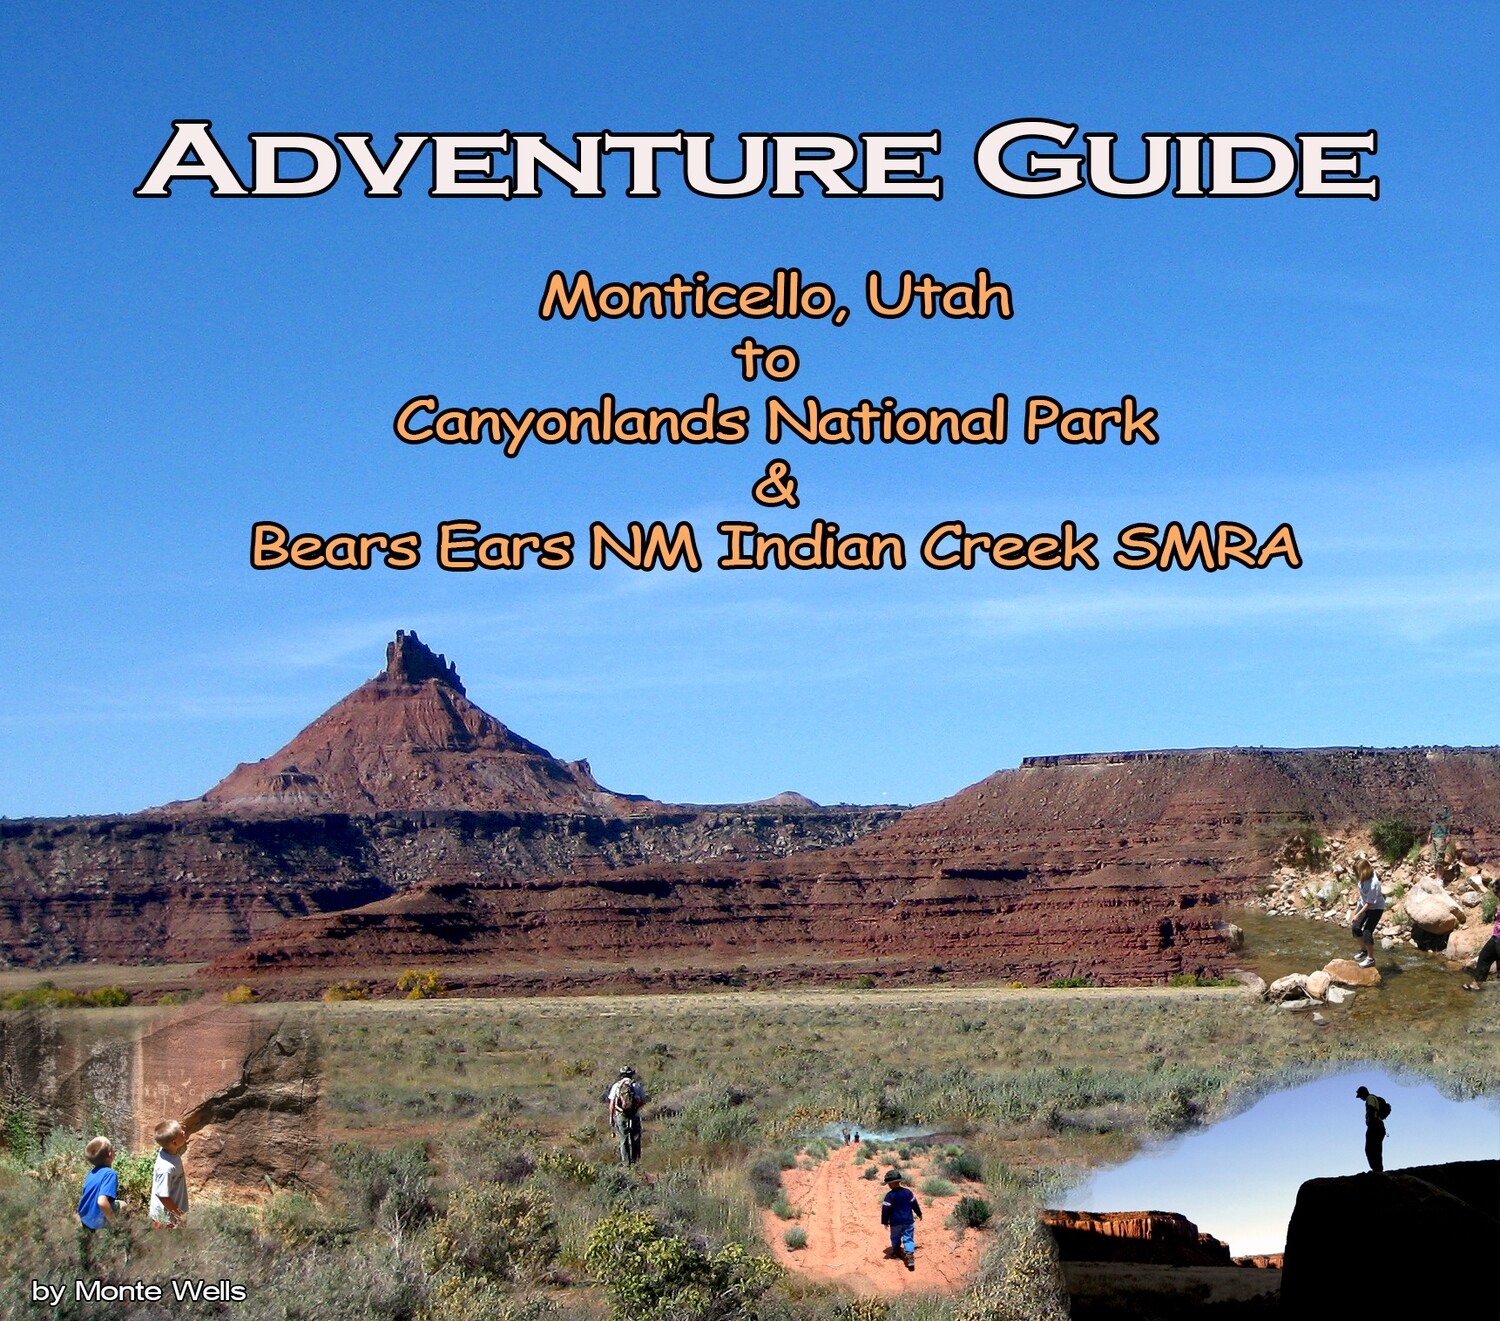 Adventure Guide - Monticello, Utah to
Canyonlands National Park